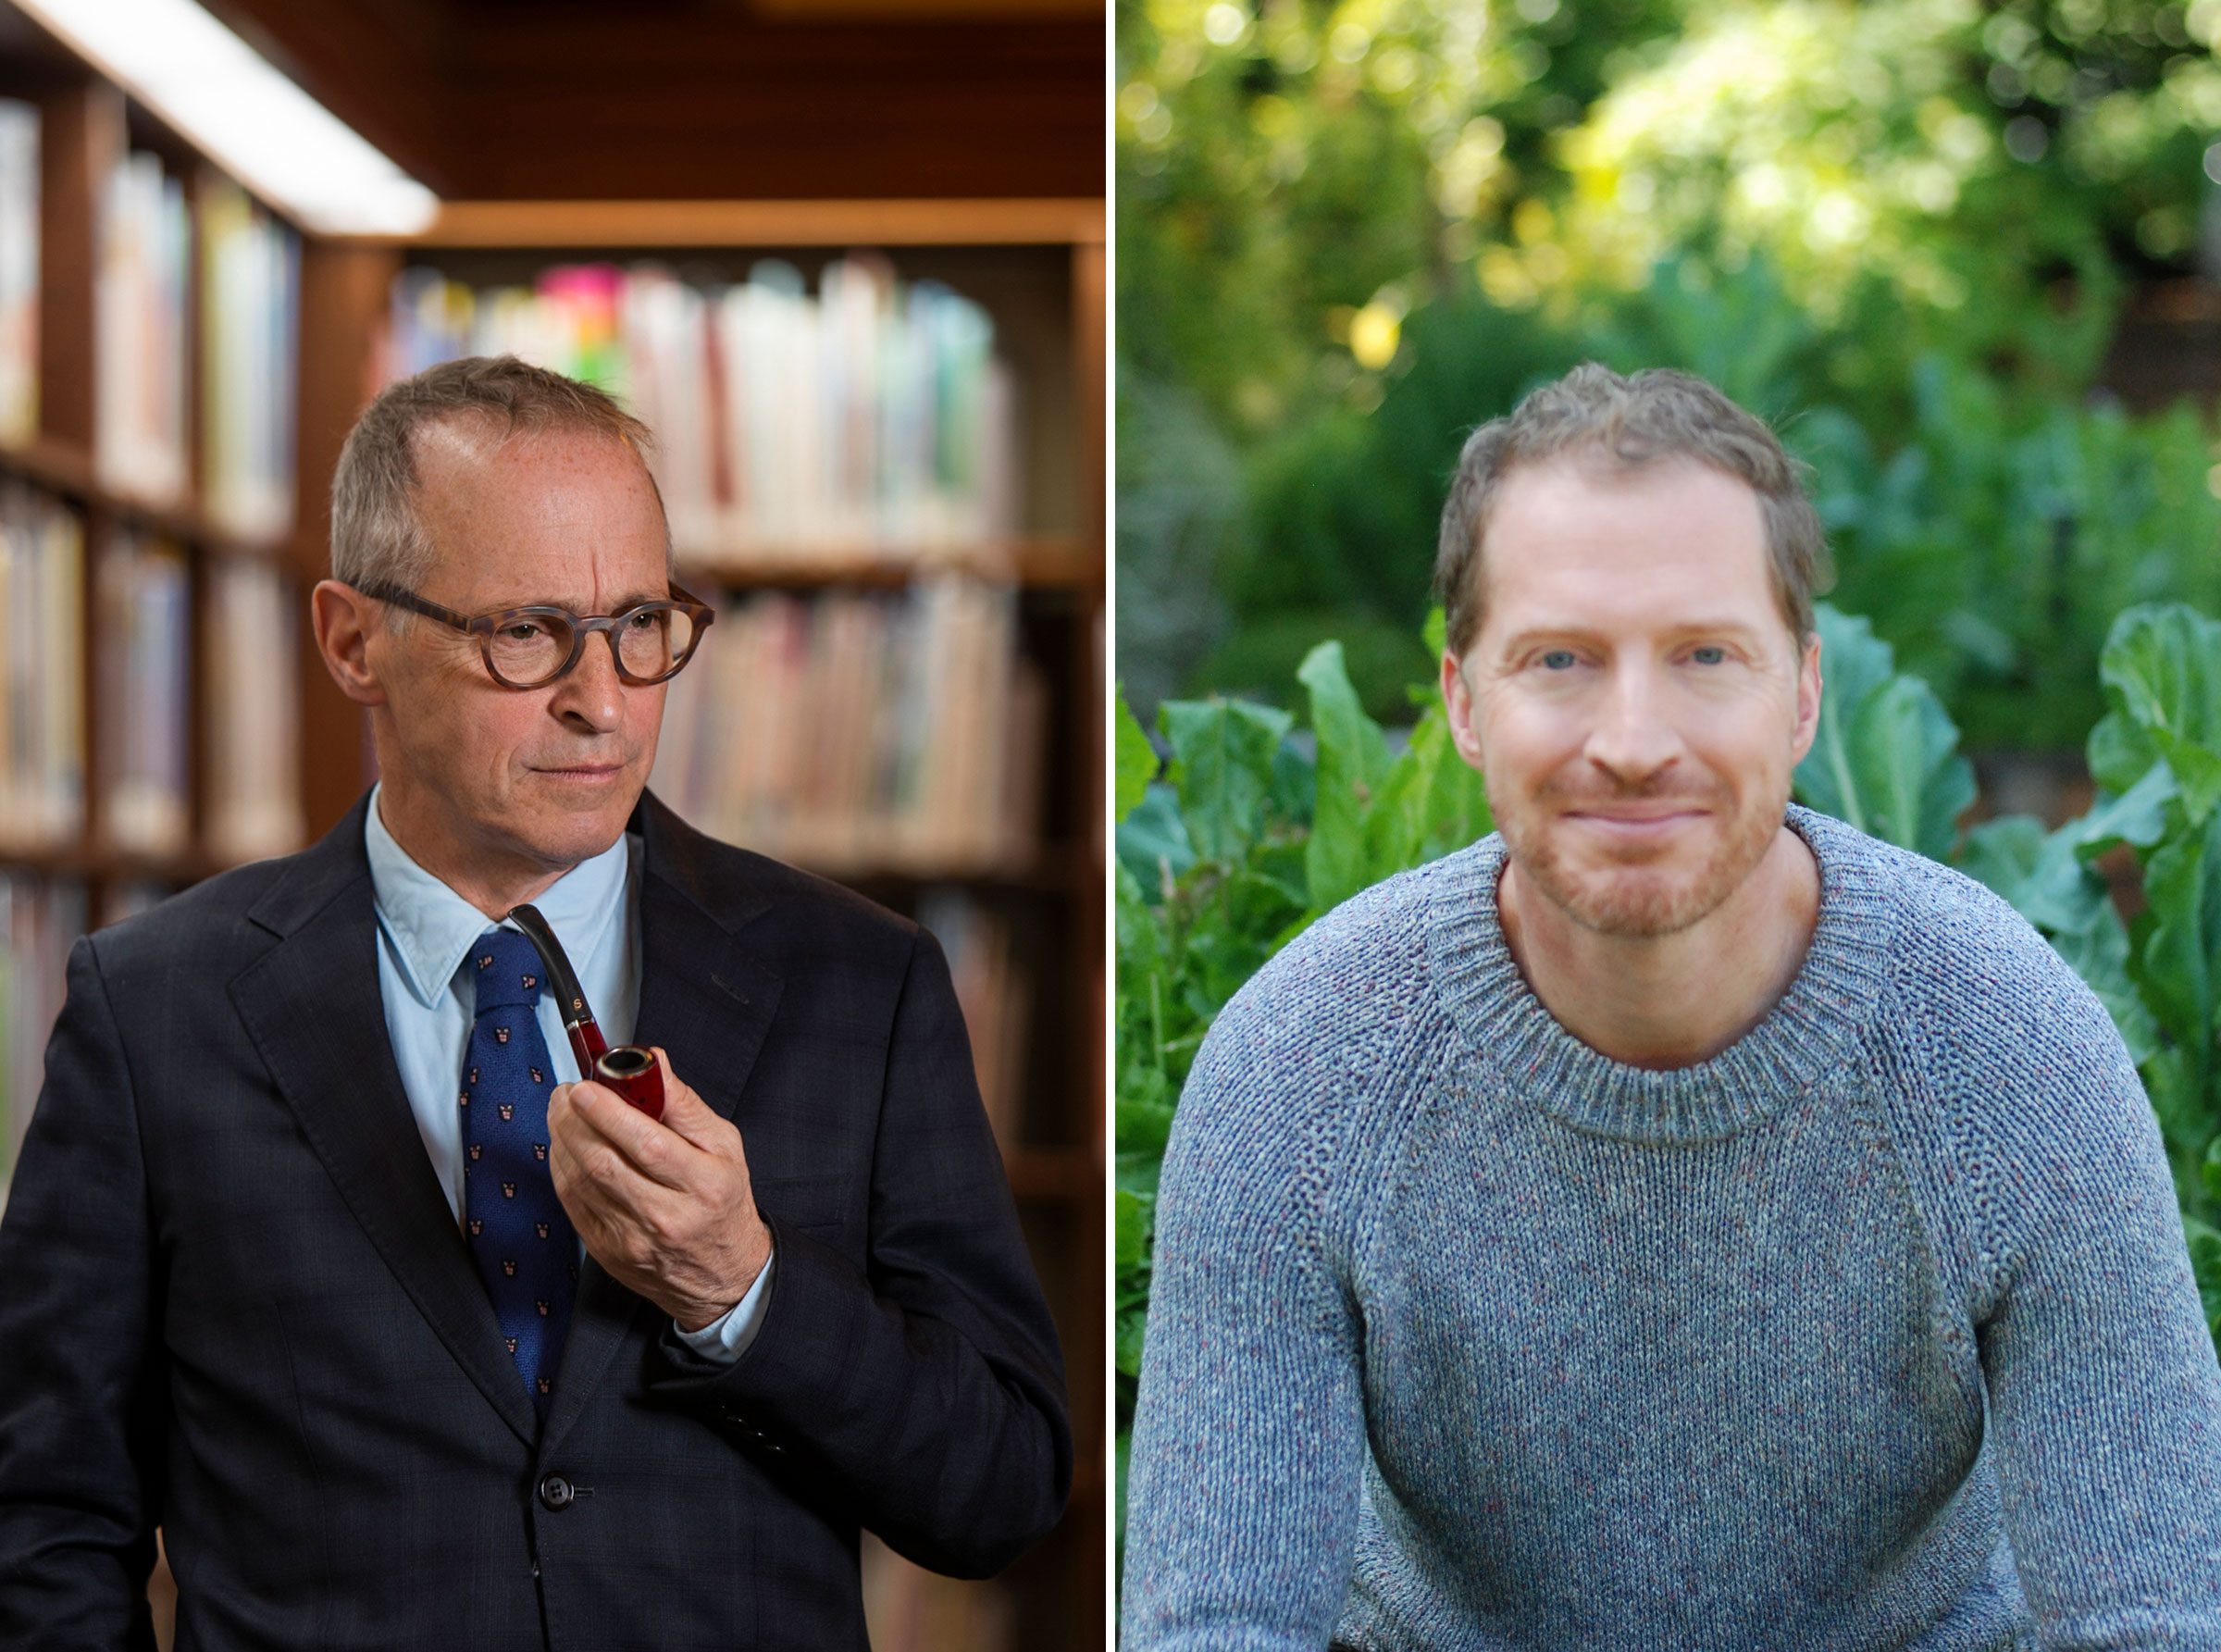 Authors David Sedaris (left) and Andrew Sean Greer discuss their books 'Happy-Go-Lucky' and 'Less Is Lost,' swap travel stories, and reflect on the power of humor writing (Sedaris: Anne Fishbein; Greer: Kaliel Roberts)